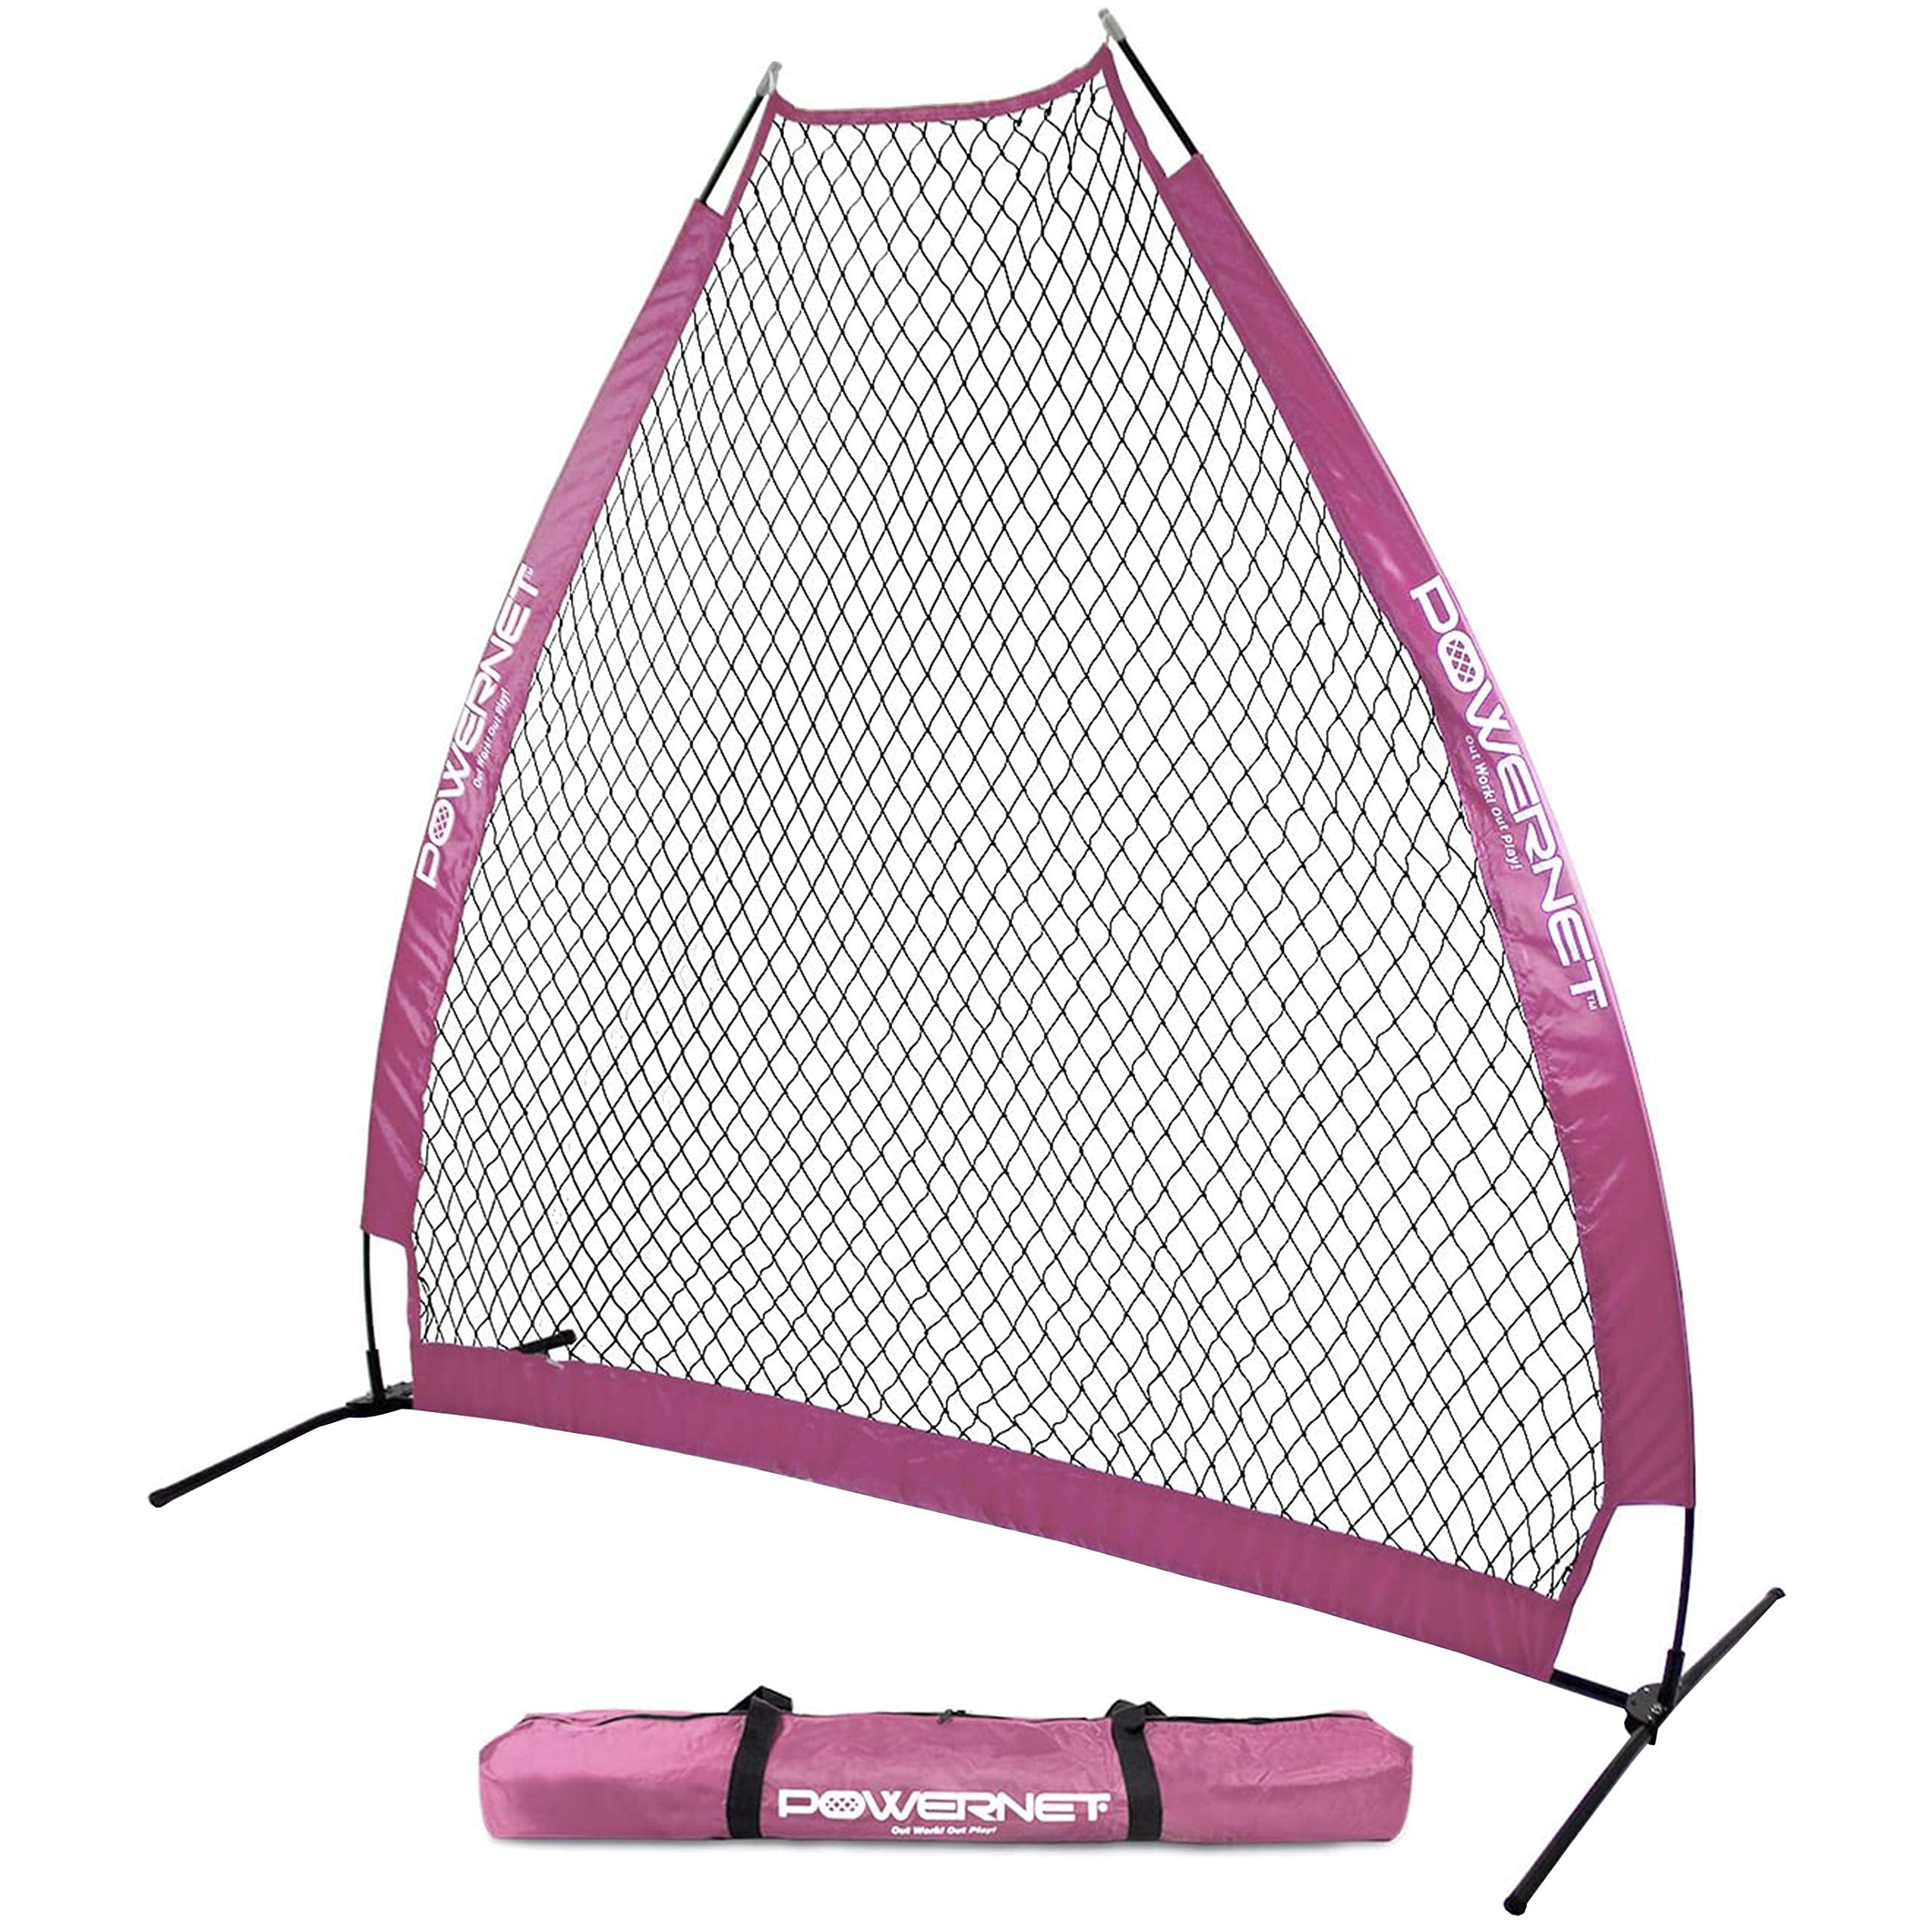 PowerNet Portable Baseball A-Frame Pitching Protection Screen NetTeam Colors 